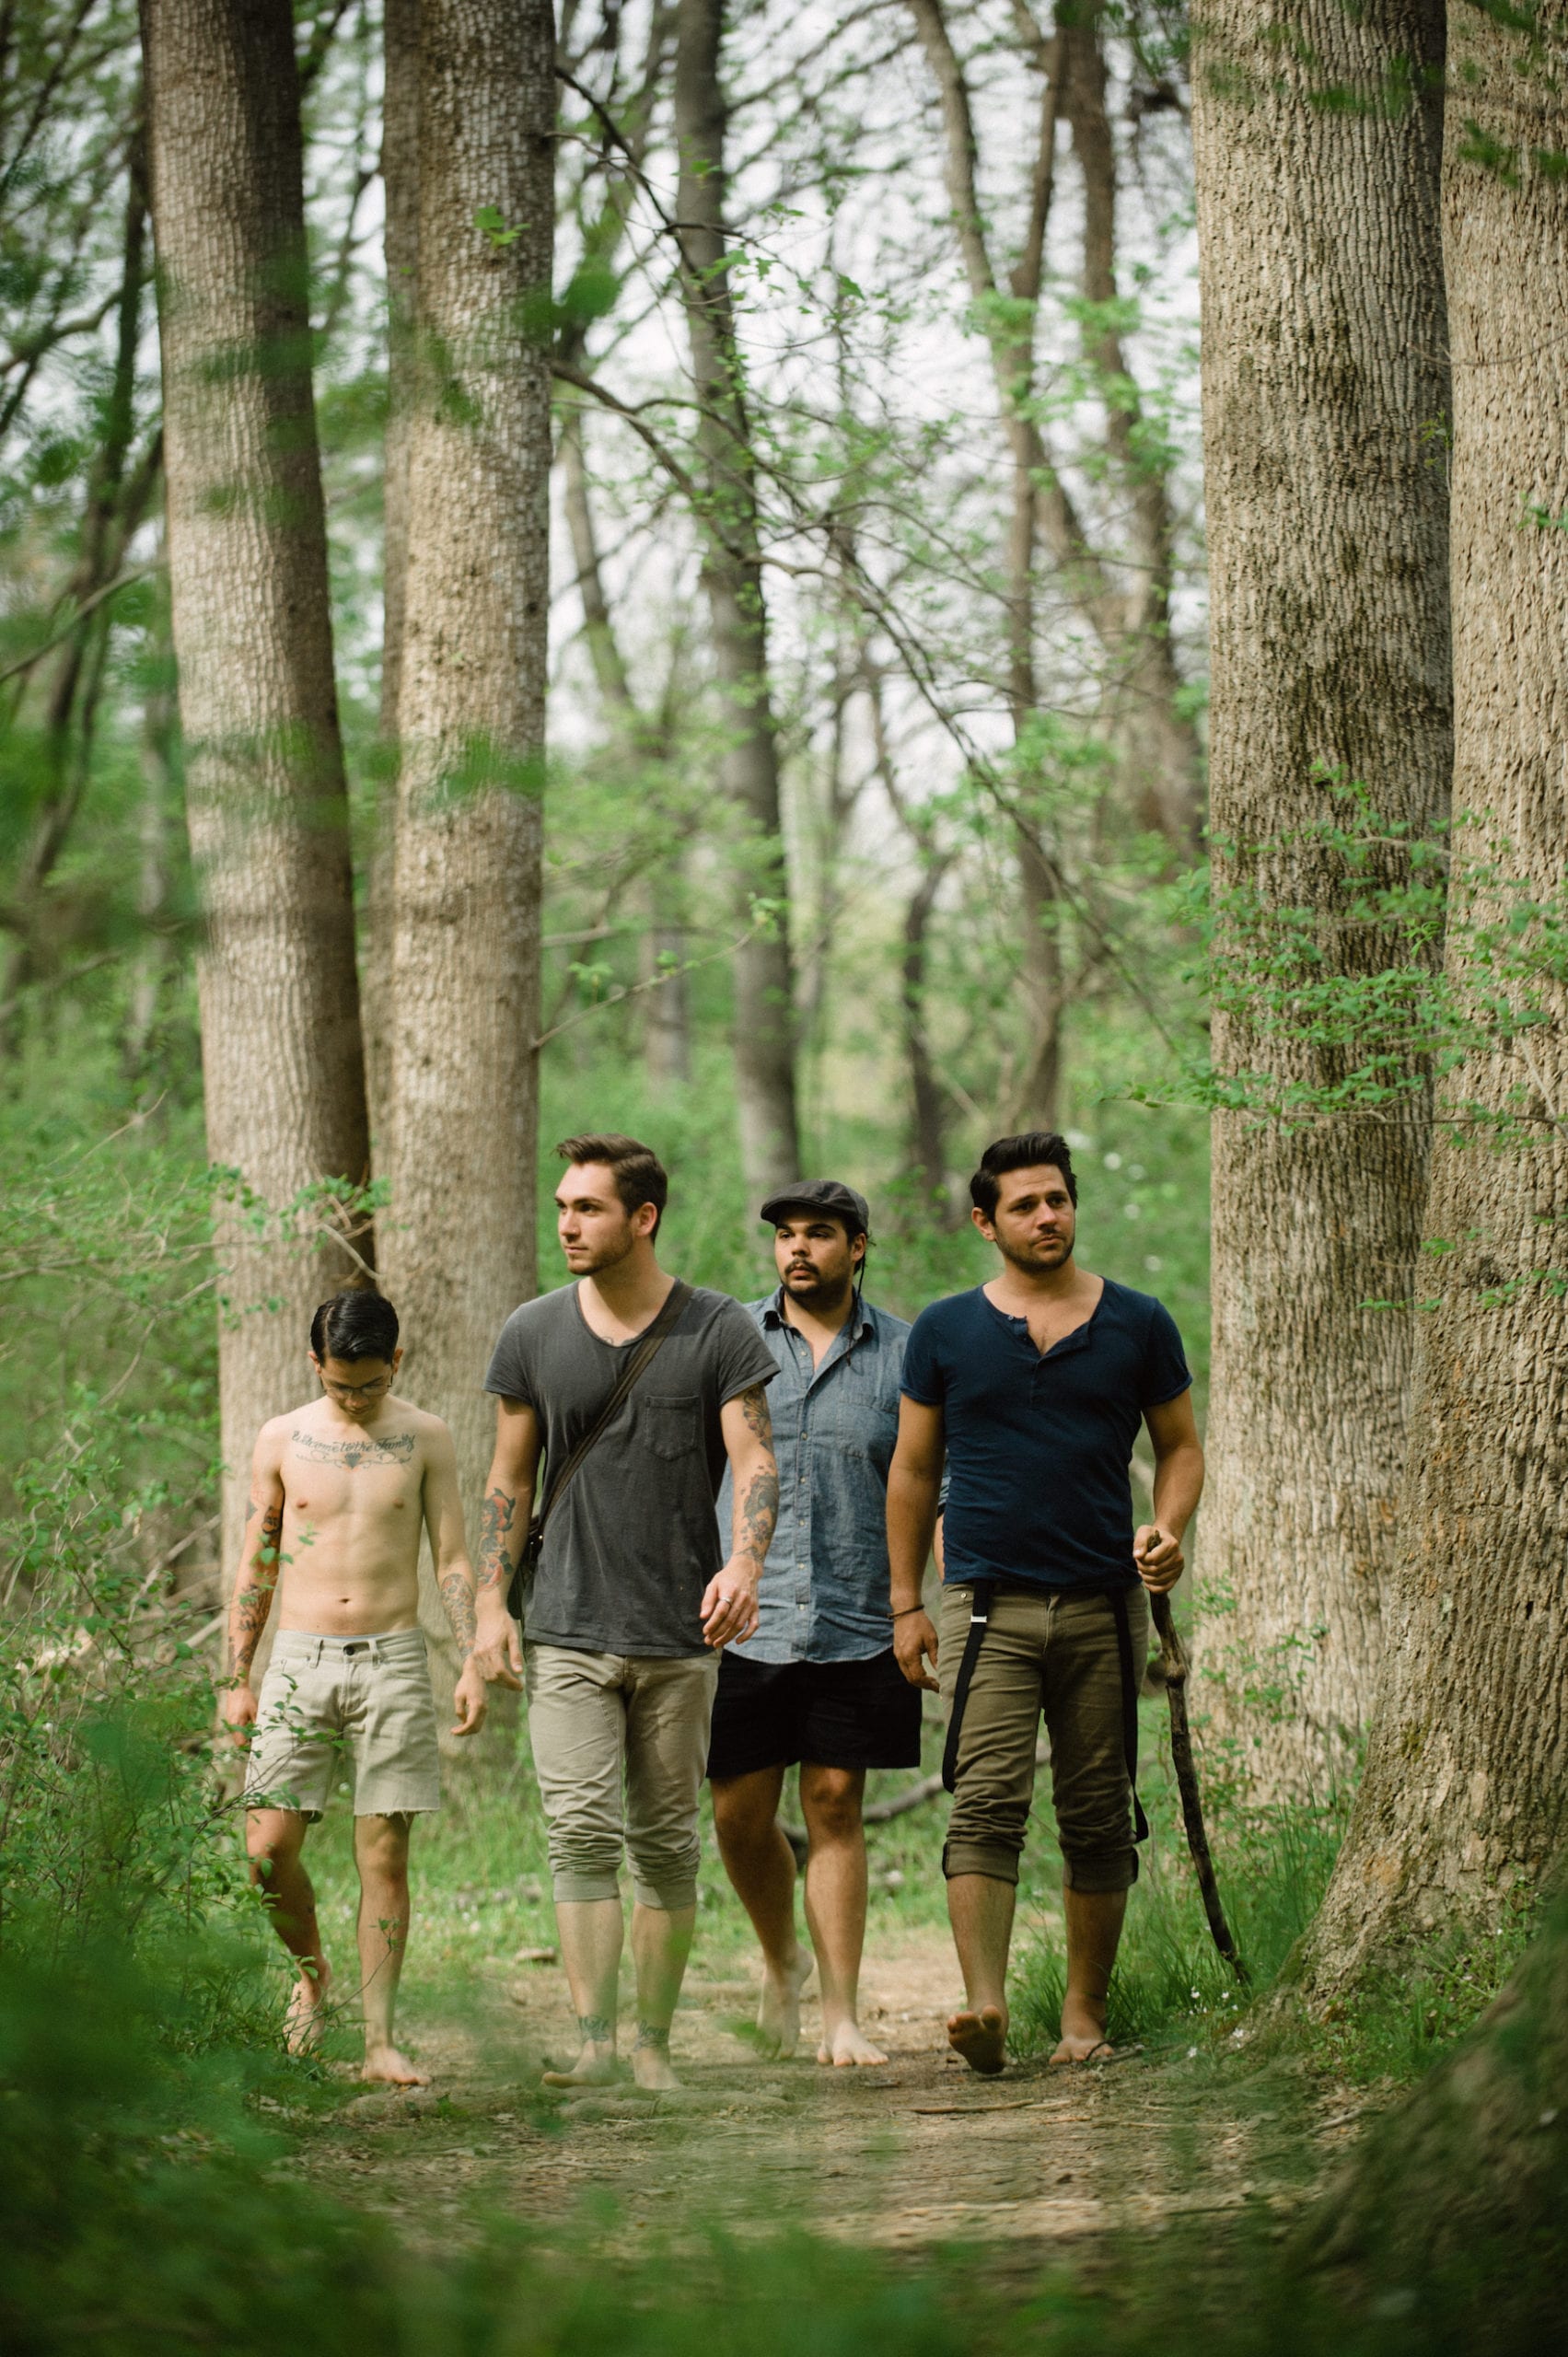 Kids American Indie Rock Band Four men walking in a forest with one shirtless with tattoos and one holding a stick